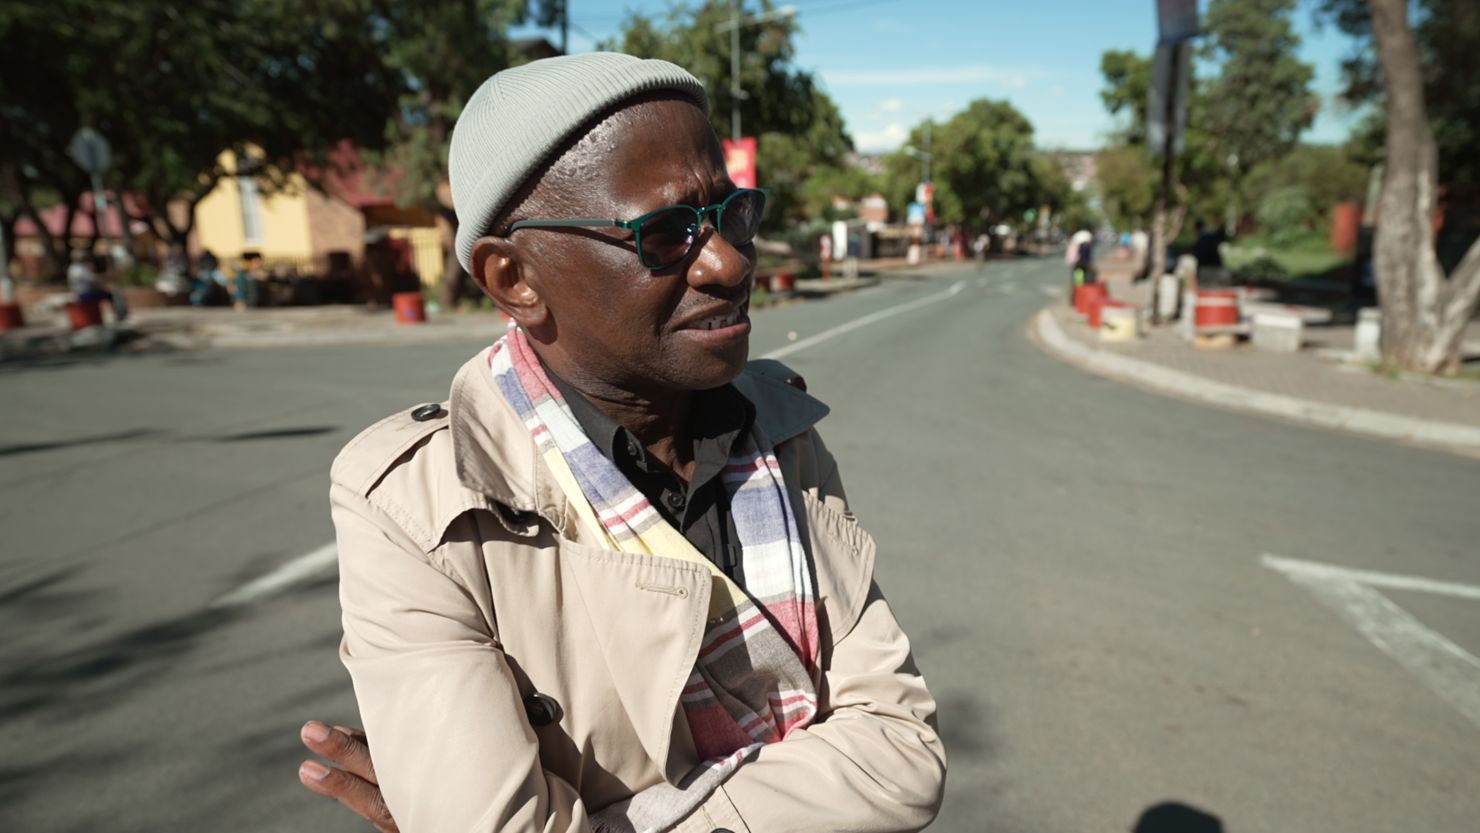 Seth Mazibuko was just 16 years old when he helped lead the Soweto youth uprising on June 16, 1976. He was held in solitary confinement for months before being jailed on Robben Island for seven years.